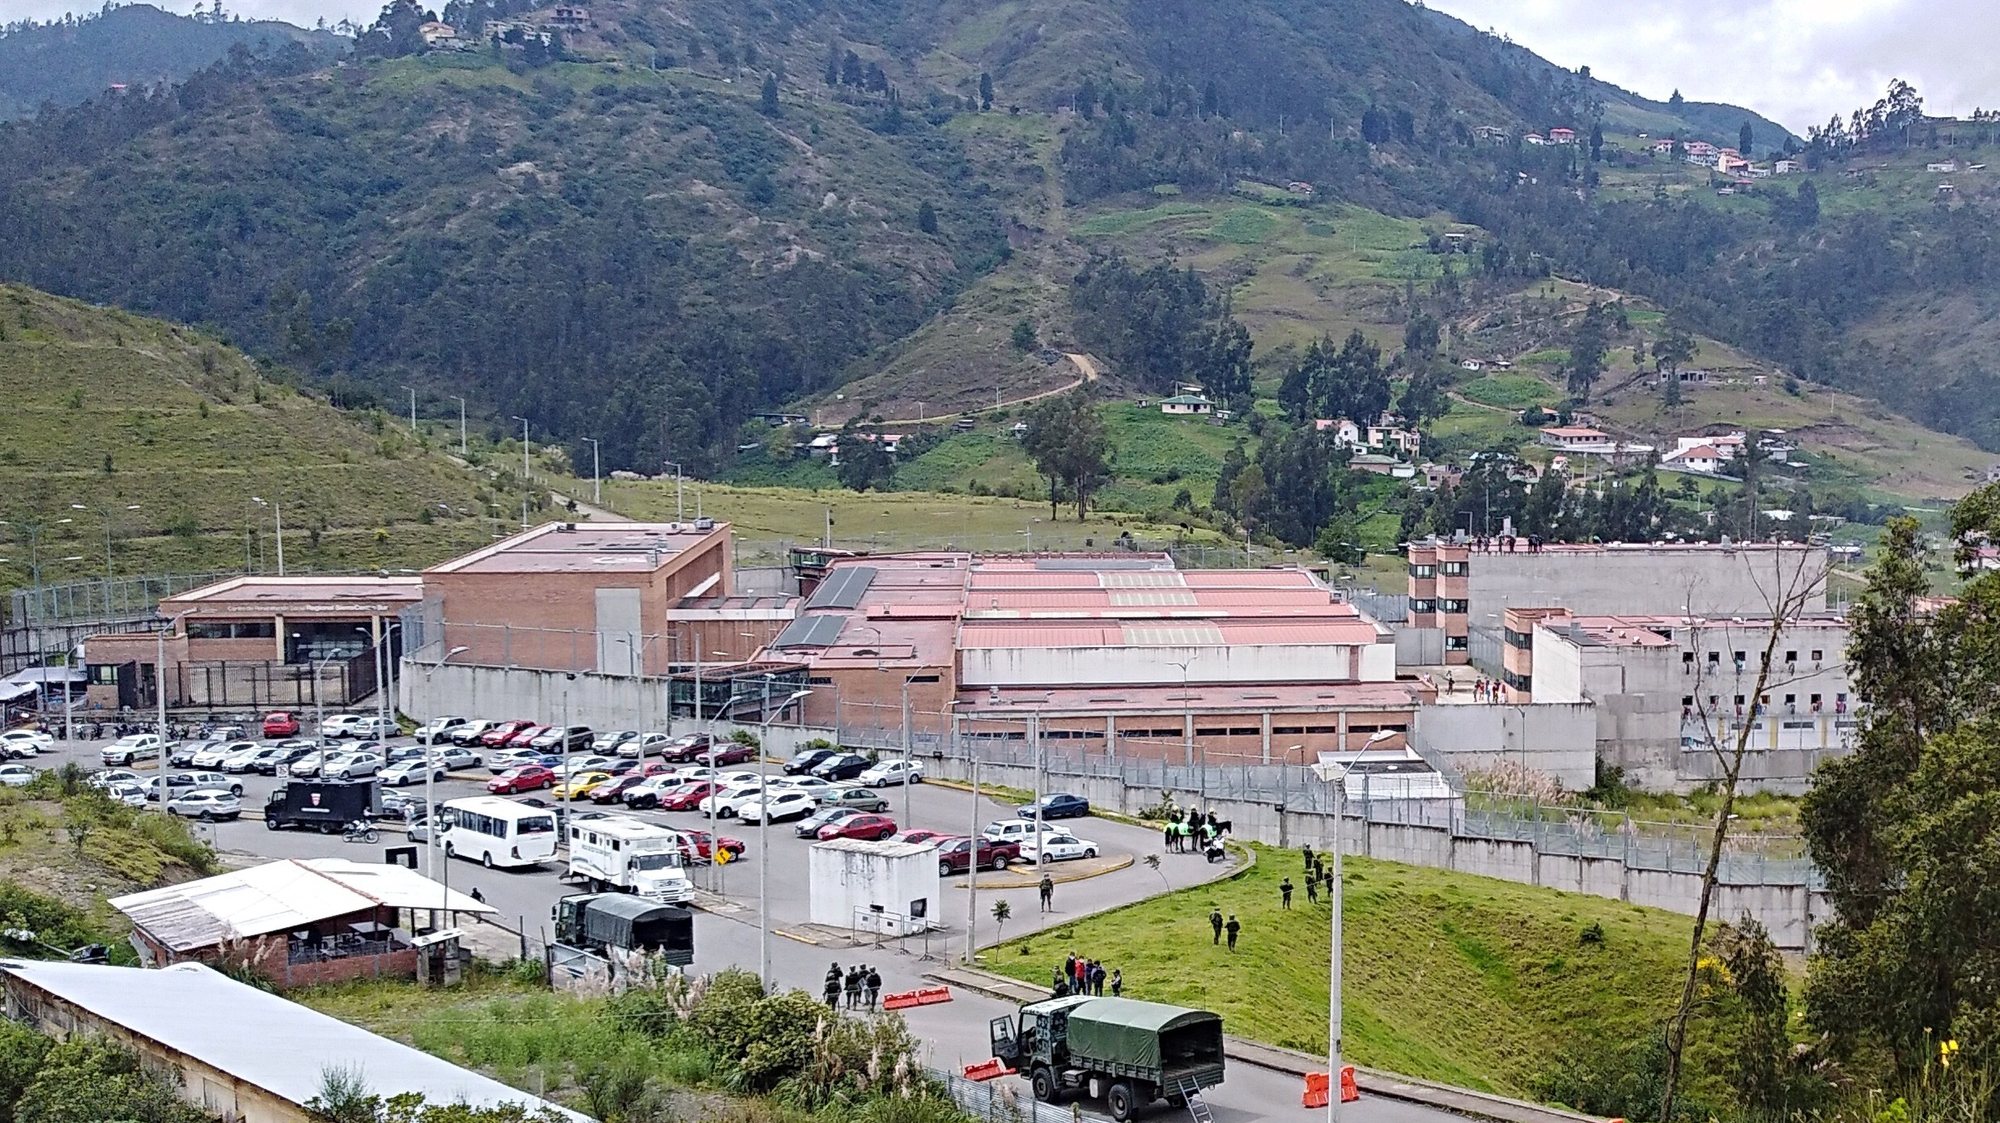 epa09032941 A handout photo made available by El Nuevo Tiempo Cuenca shows a general view of the Turi prison, in Cuenca, Ecuador, 23 February 2021. More than 60 inmates died this Tuesday in Ecuador in a chain of violent clashes in three prisons, attributed by the authorities to a dispute between two gangs for control of prisons. The latest official figures indicate 62 deaths, most of them in the Turi de Cuenca prison. There, 33 dead inmates were counted, while another 21 died in the Guayaquil prison and another 8 in the Cotopaxi prison, about 80 kilometers from Quito.  EPA/El Nuevo Tiempo Cuenca / HANDOUT MANDATORY CREDIT HANDOUT EDITORIAL USE ONLY/NO SALES